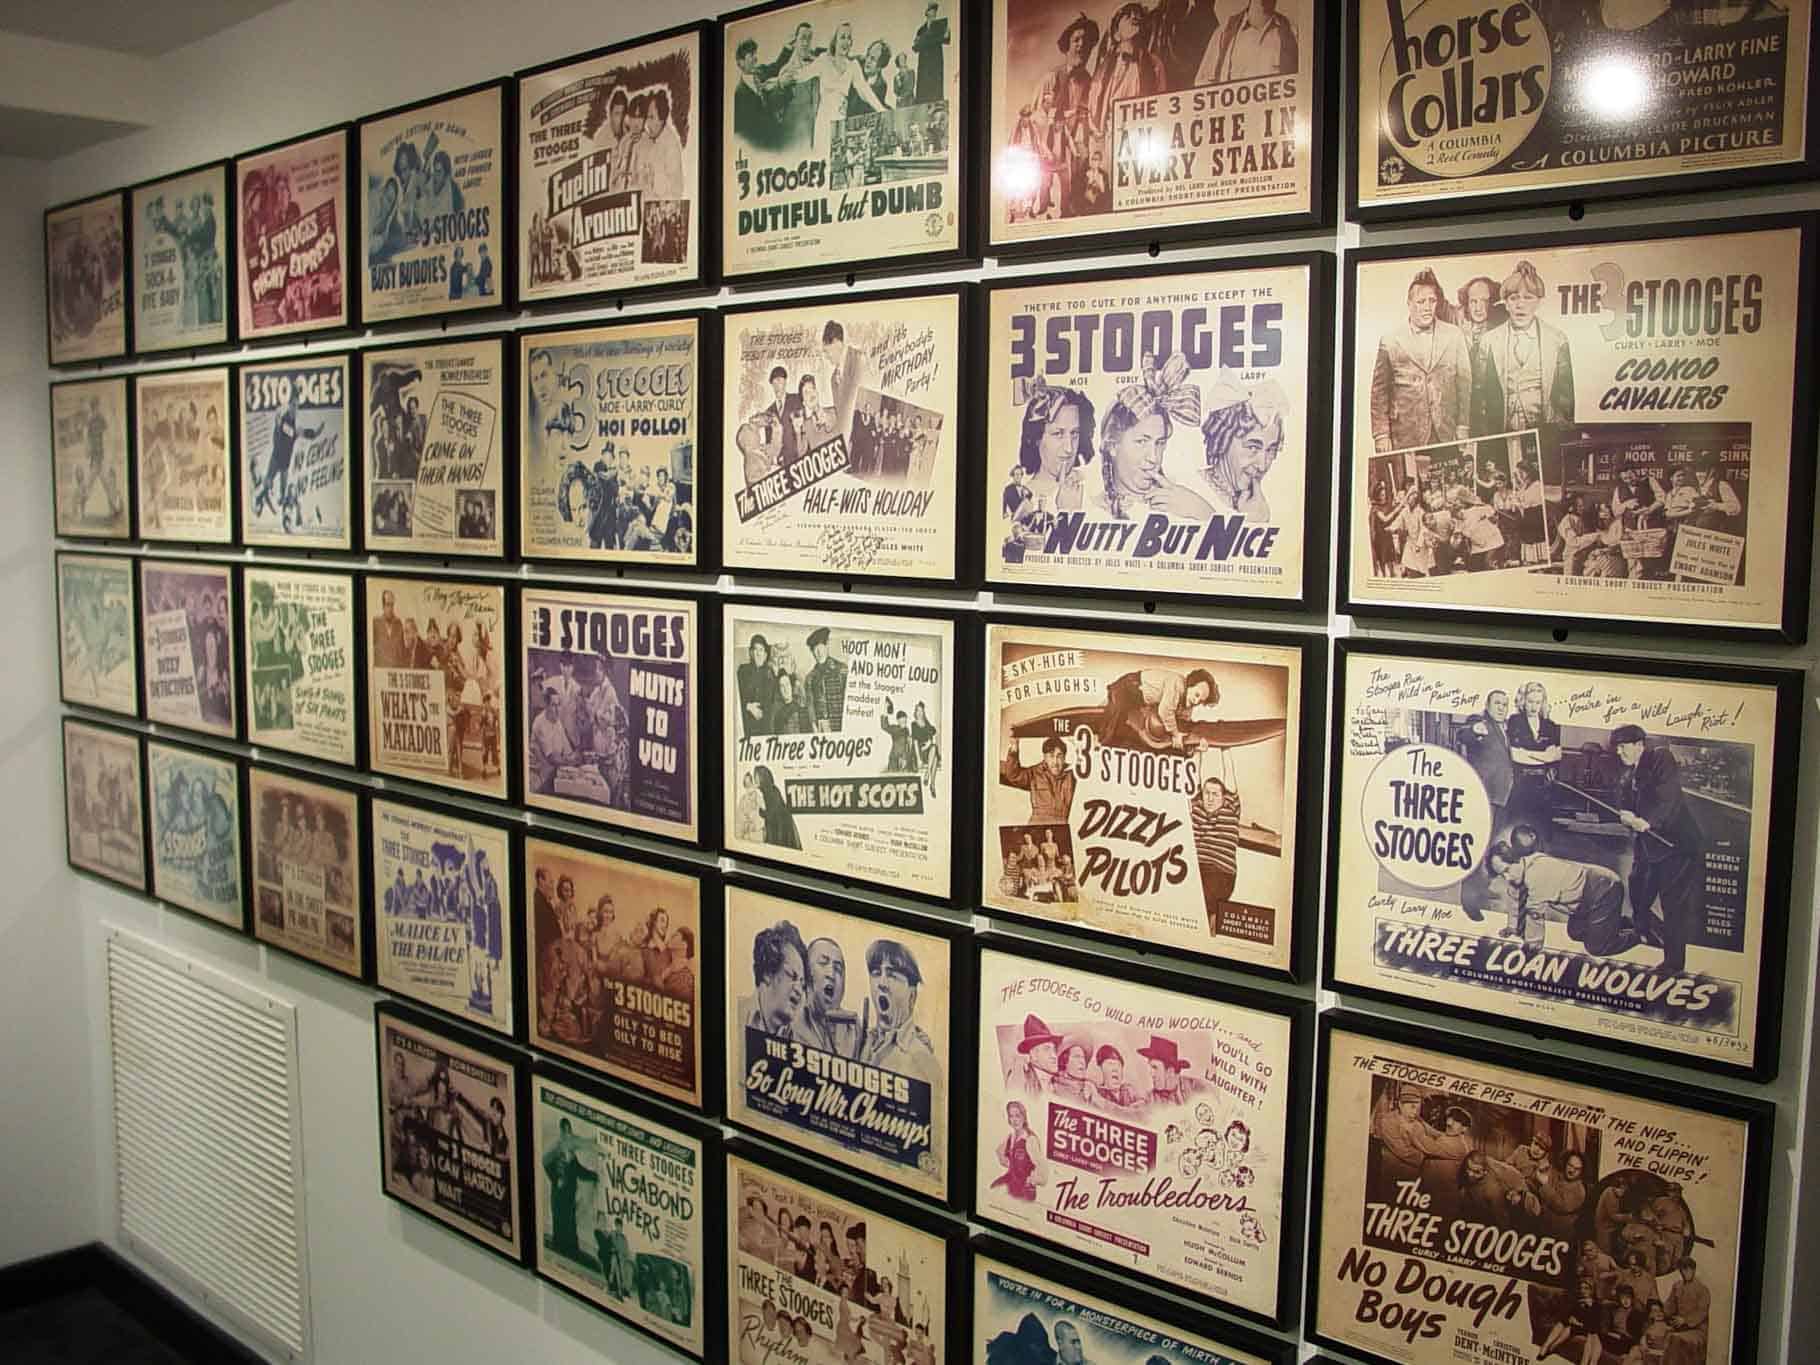 A wall of framed promotional posters